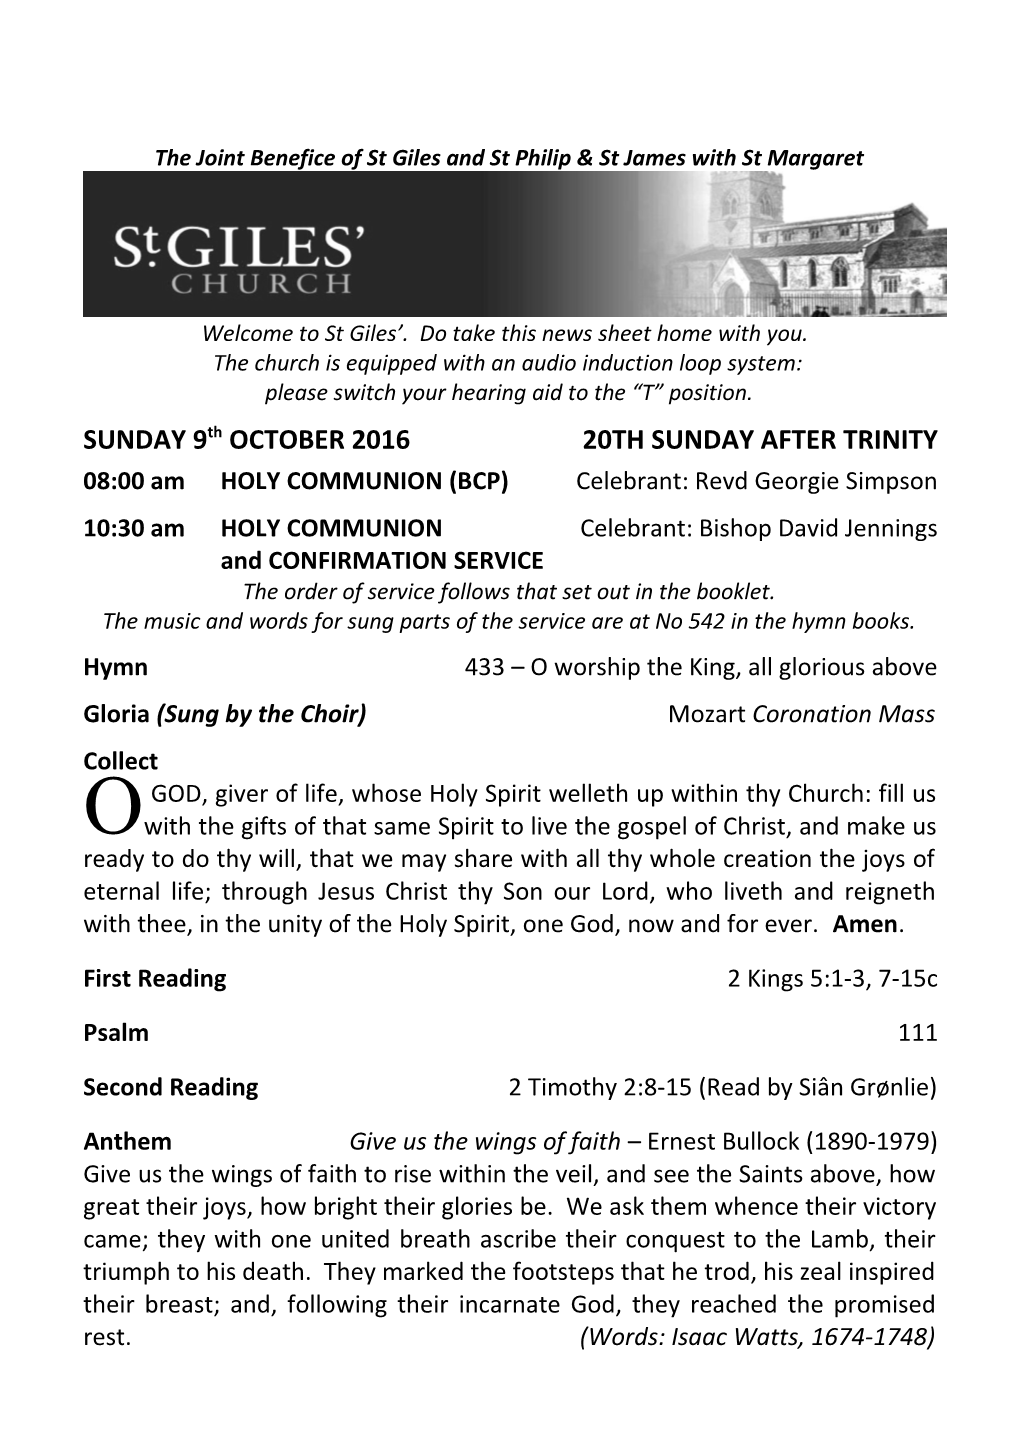 The Joint Benefice of St Giles and St Philip & St James with St Margaret s2